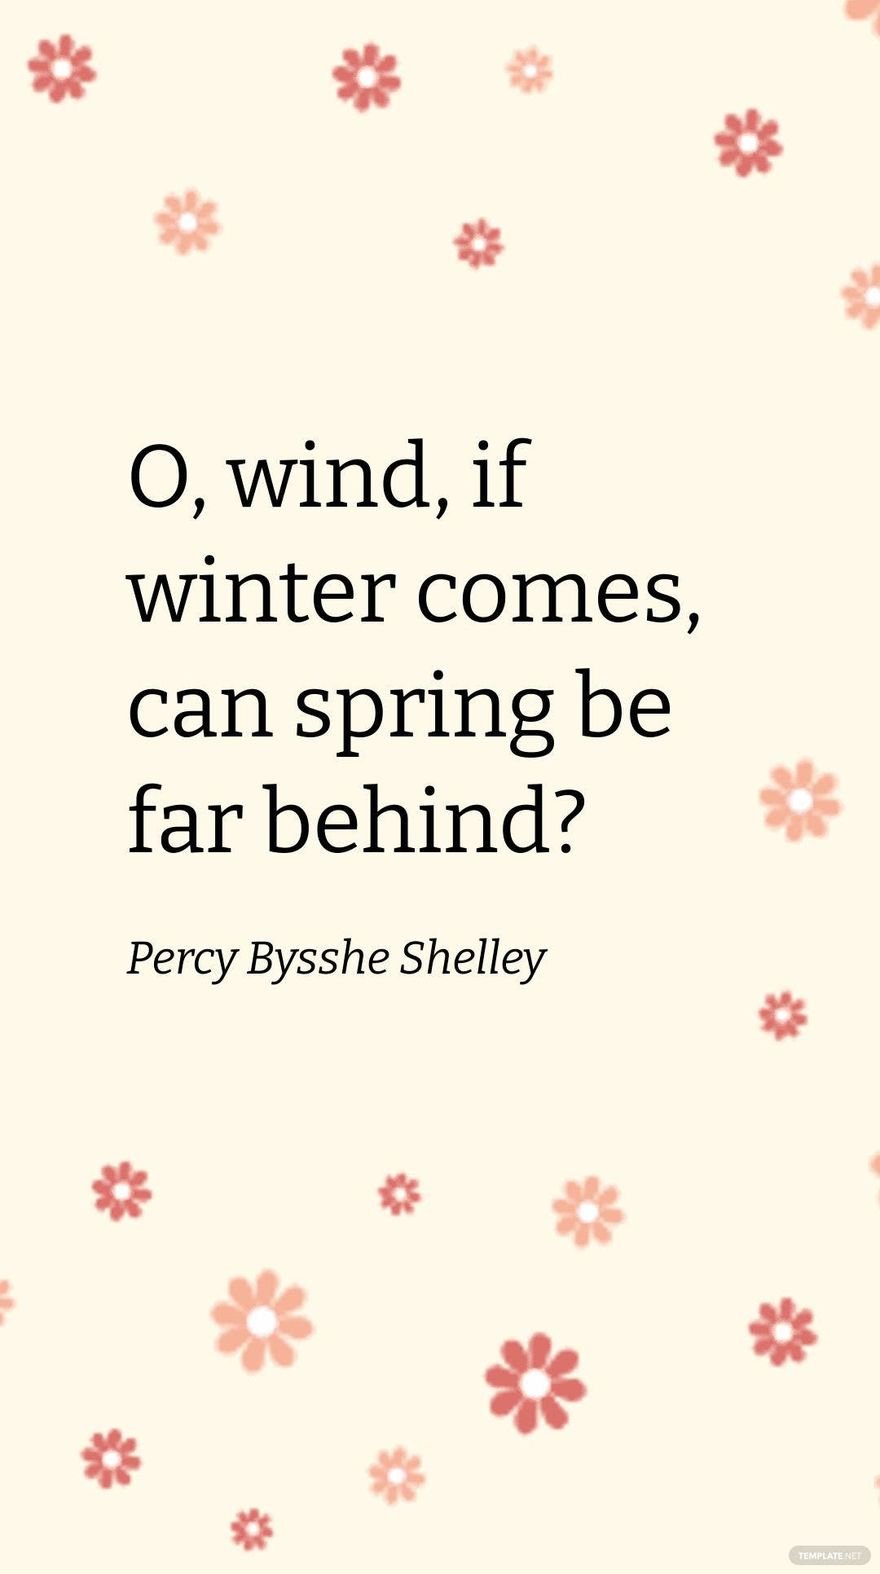 Percy Bysshe Shelley - O, wind, if winter comes, can spring be far behind? in JPG